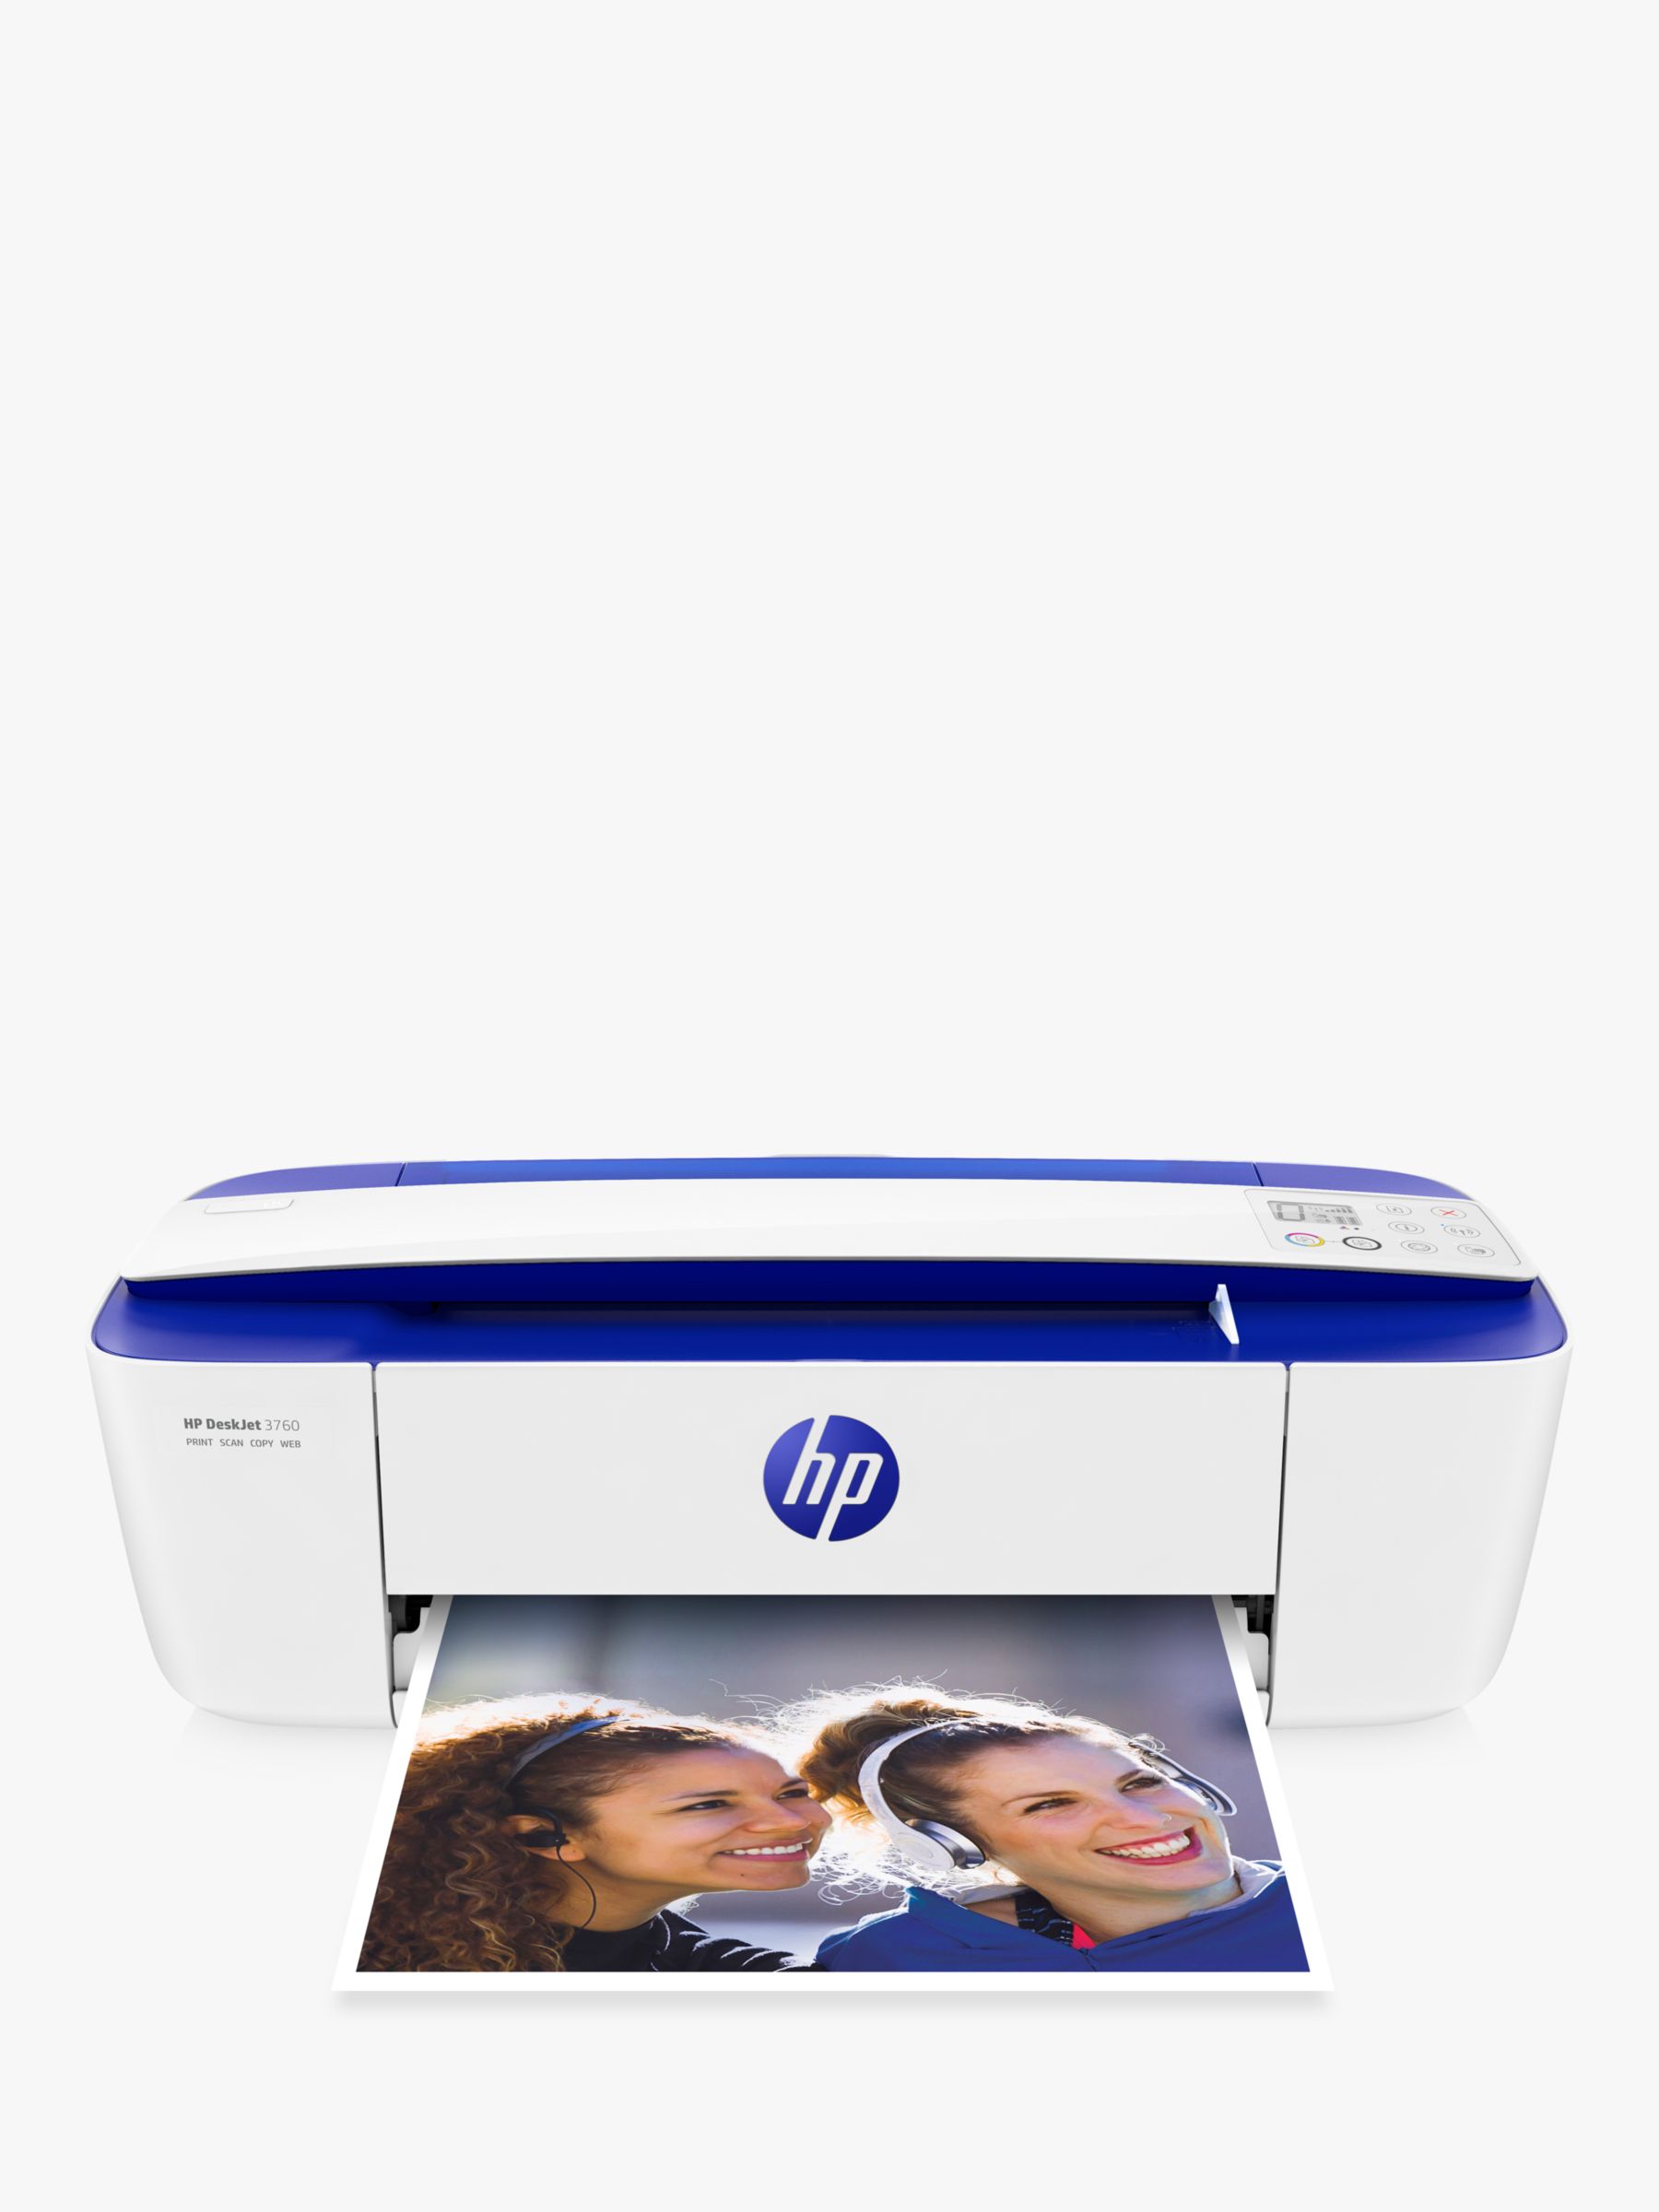 HP Deskjet 3760 All-in-One Wireless HP Instant Ink Compatible with 4 Trial, Blue/White